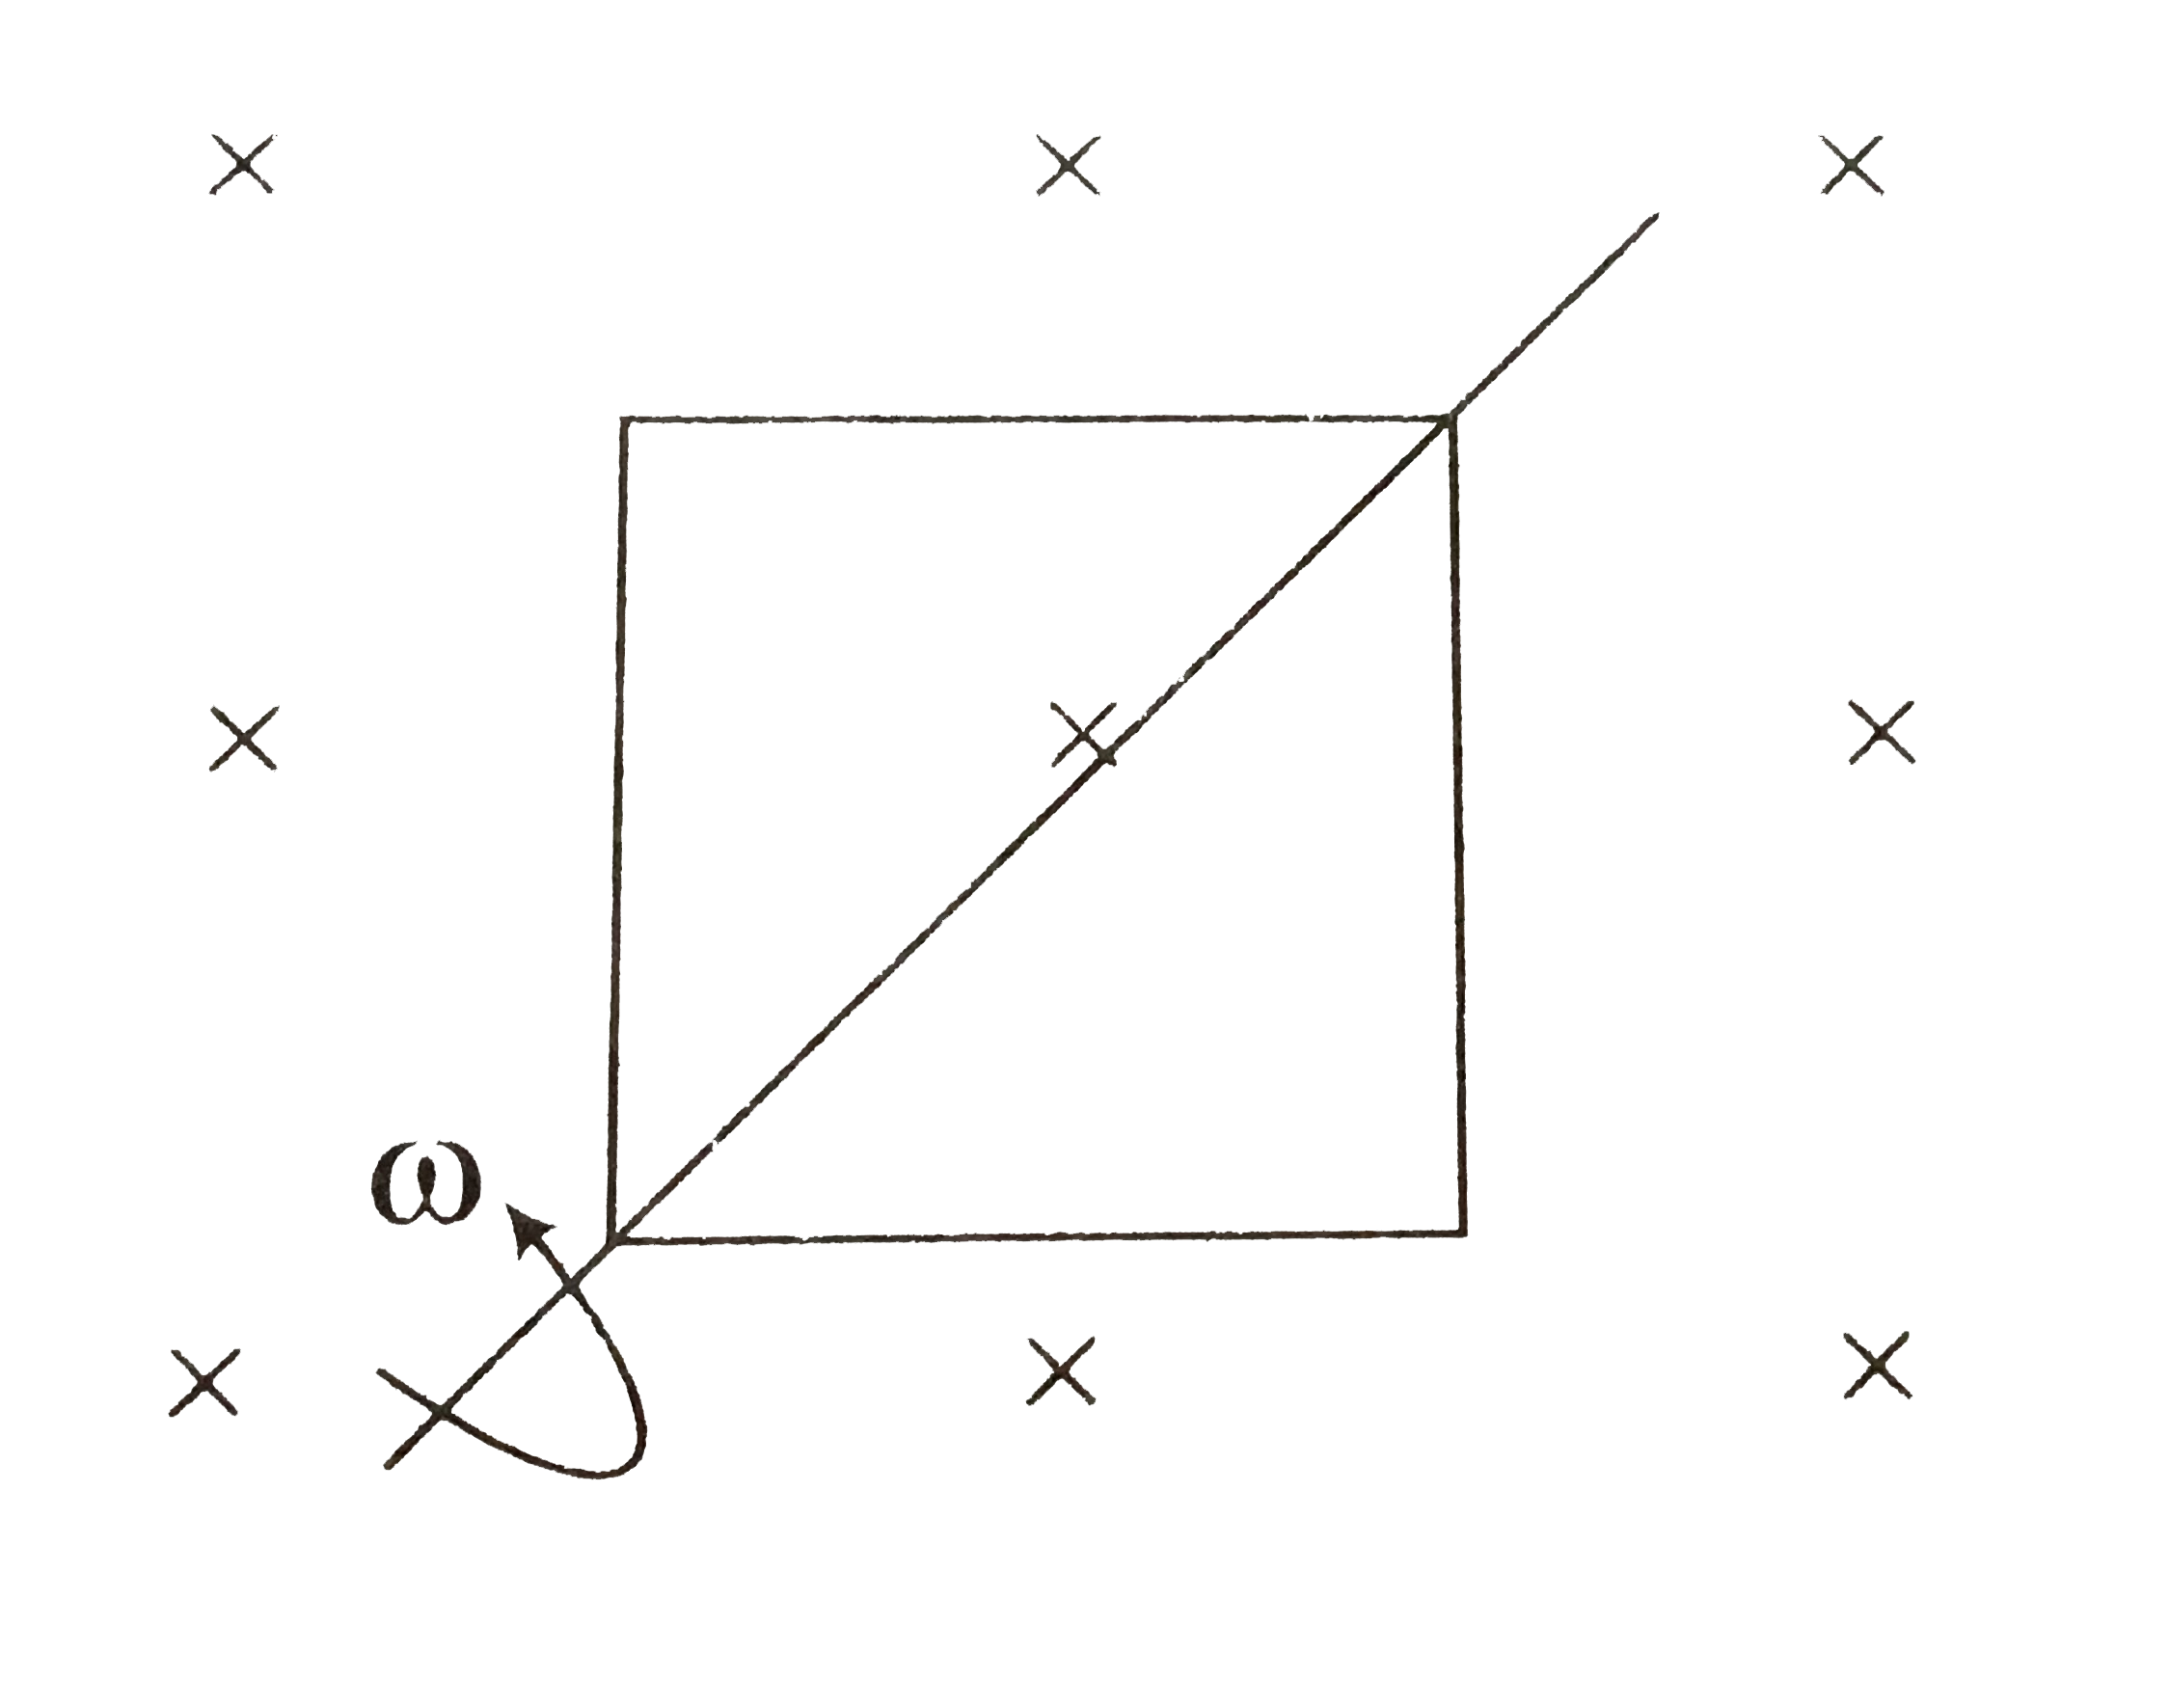 A square loop of edge b having M turns is rotated with a uniform angular velocity  omega about one of its diagonals which is kept fixed in a horizontal position. A uniform magnetic field B(0) exists in the vertical direction.      Find (i) the emf induced in the coil as a function of time t.   (ii) the maximum emf induced.   (iii) the average emf induced in the loop over a long period.   (iv) if resistance of loop is R, amount of charge flown in time t = 0 to t = 2T.   (v) heat produced in time t = 0 to t = 2T.